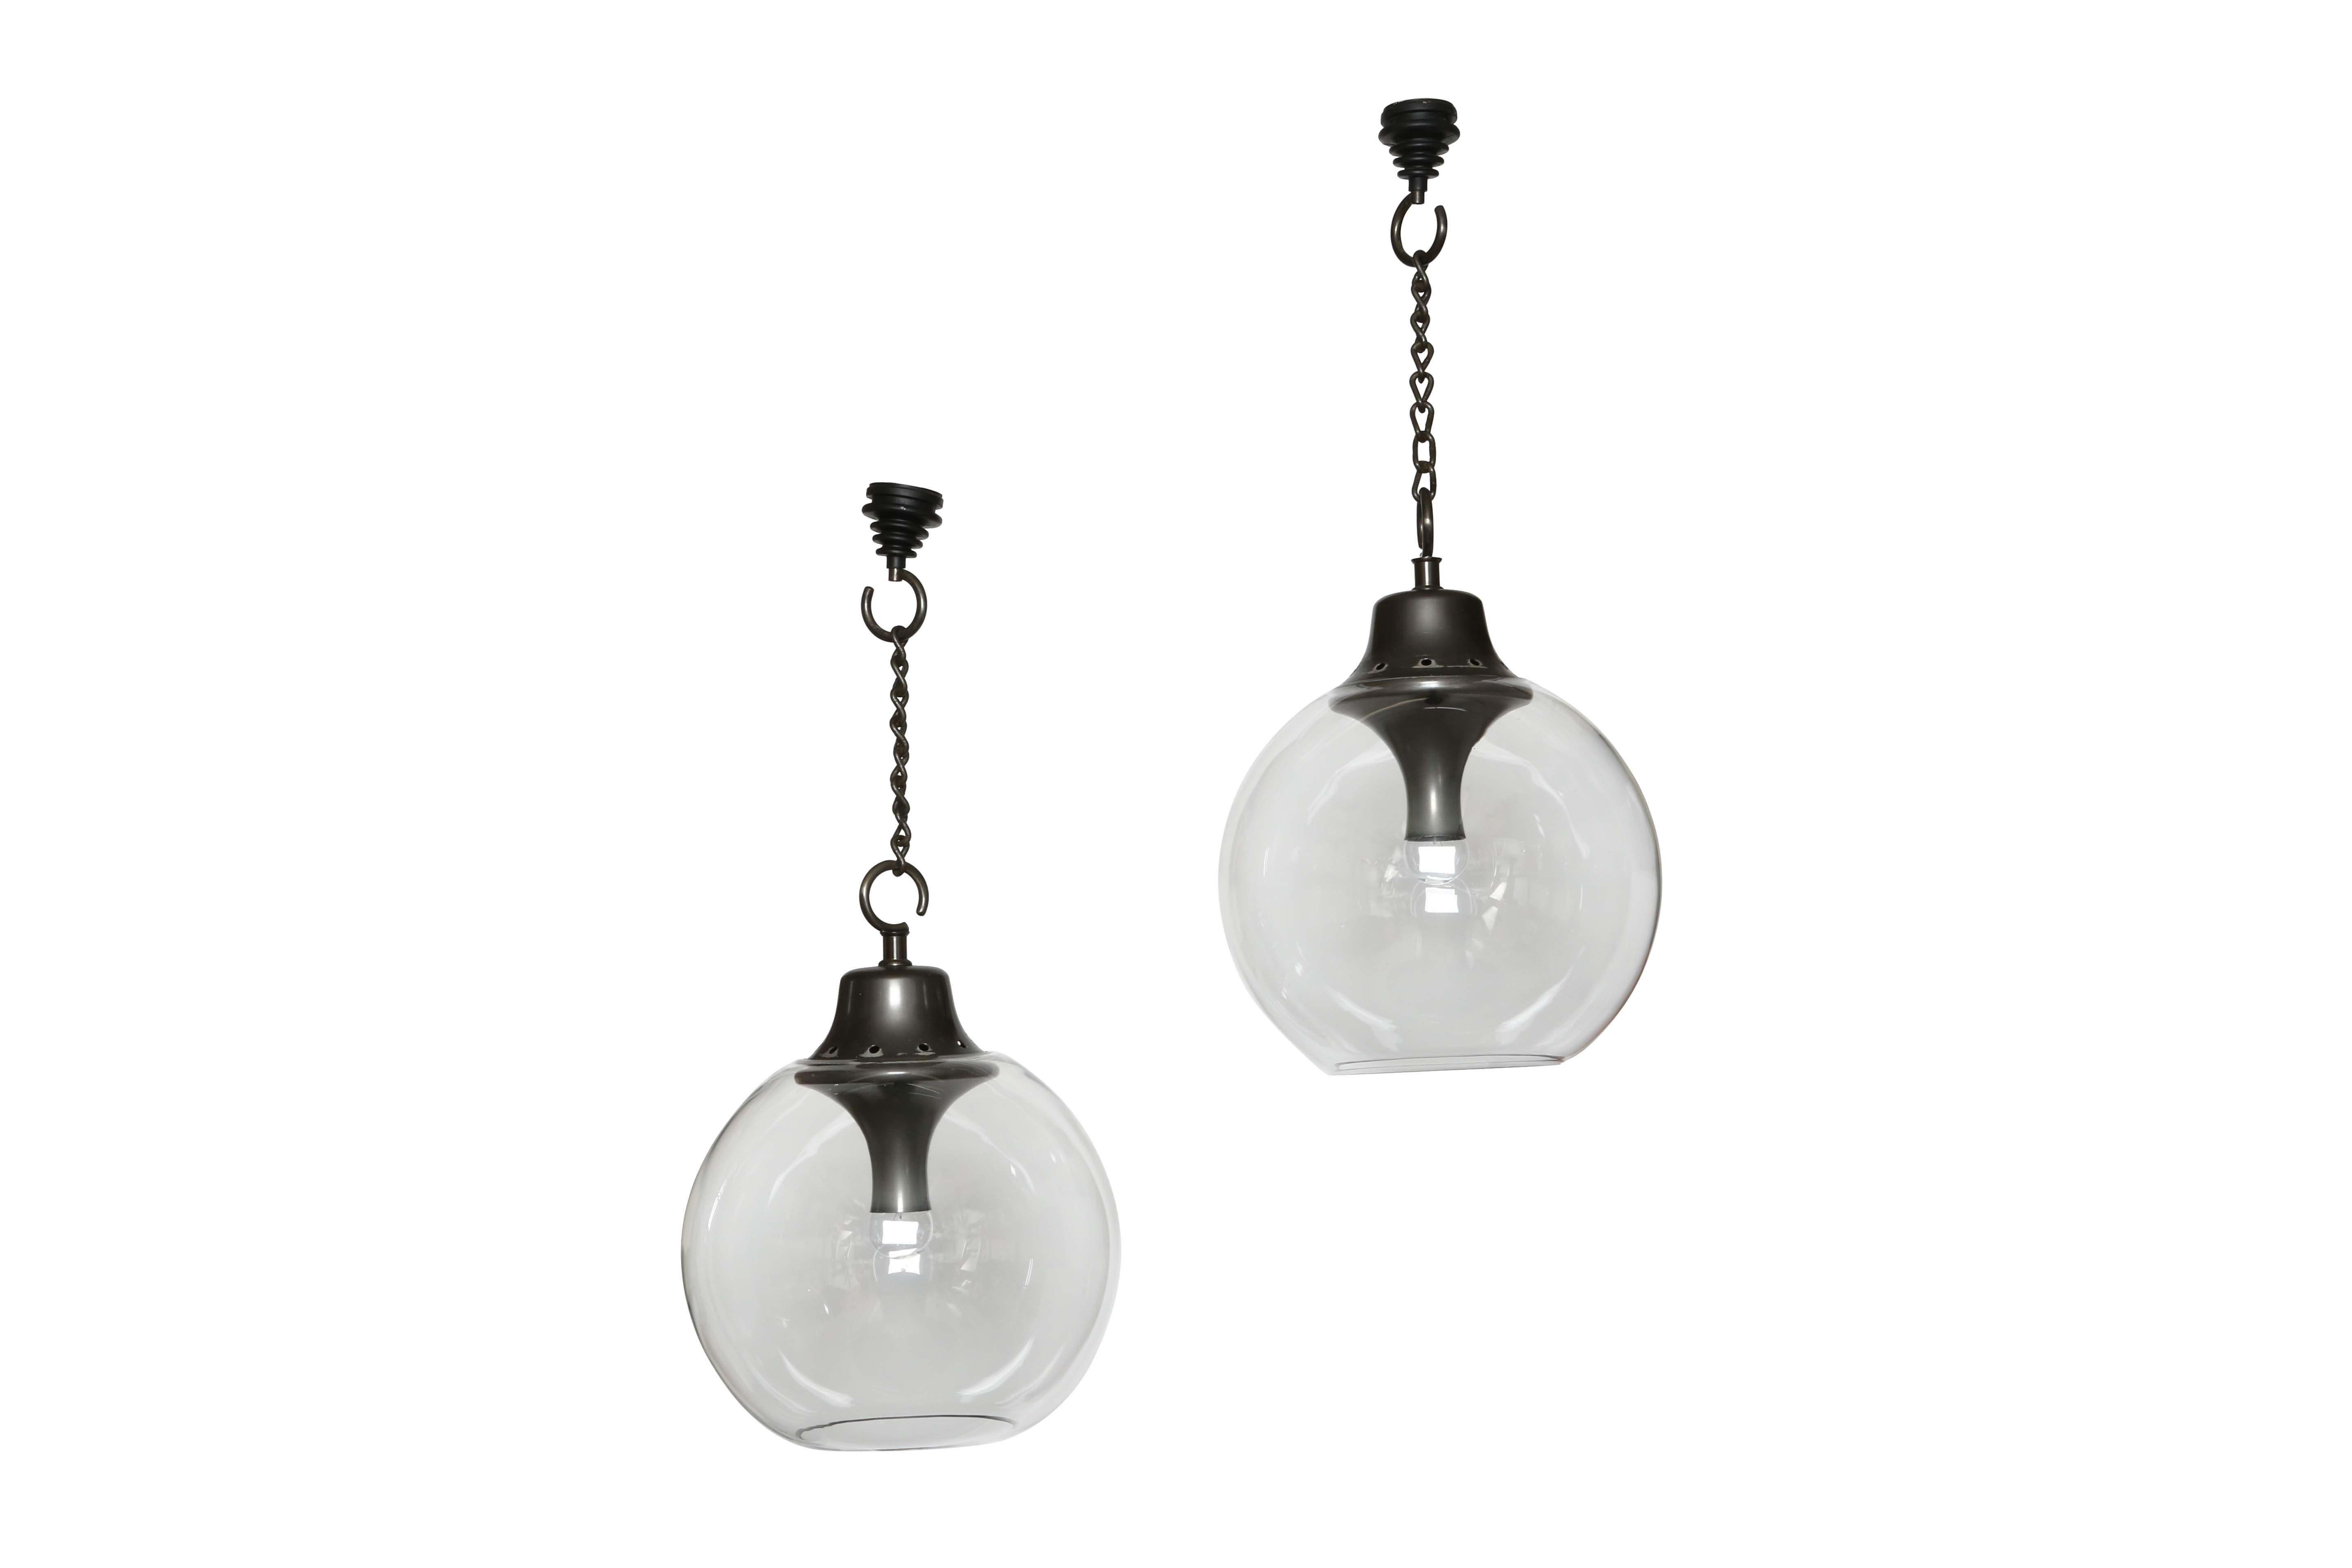 Luigi Caccia Dominioni for Azucena ceiling suspension lights.
Model LS10 Boccia. Designed and manufactured in Italy in 1960s.
Murano glass, patinated aluminum glass holder and steel chain.
Complimentary US rewiring upon request.
Priced and sold as a